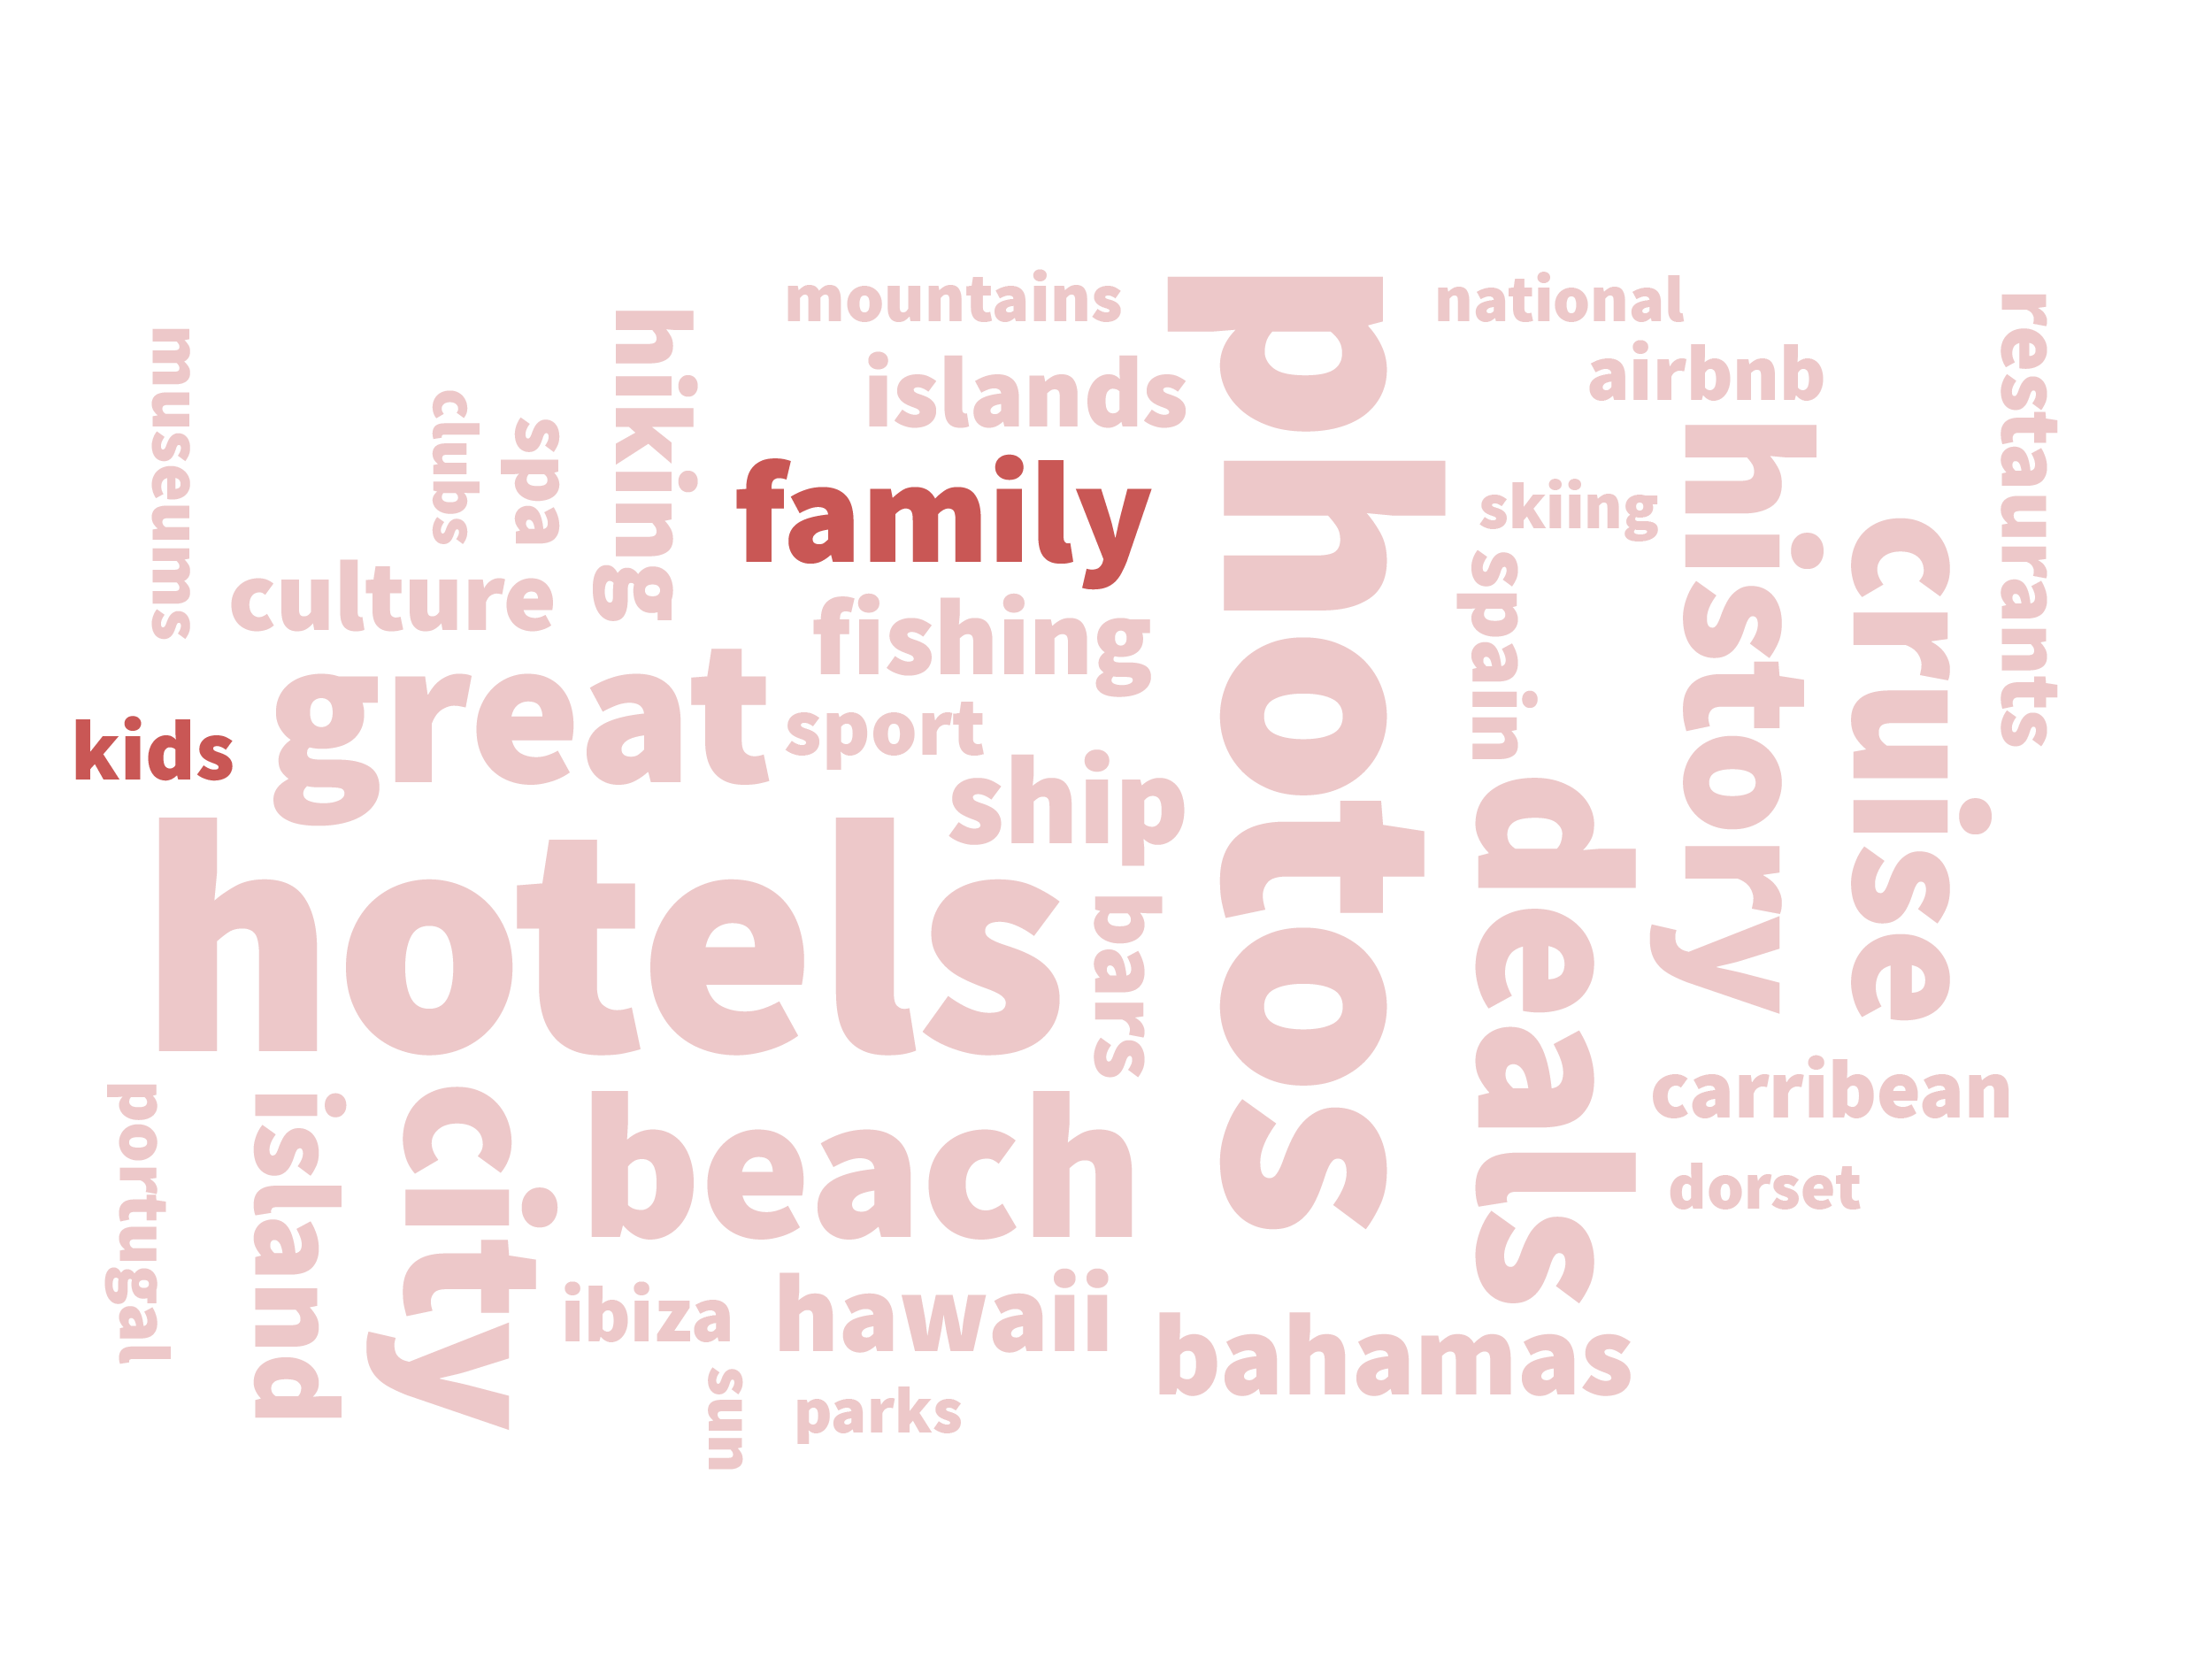 Figure 6: The key Family topics within Travel that people are consuming.